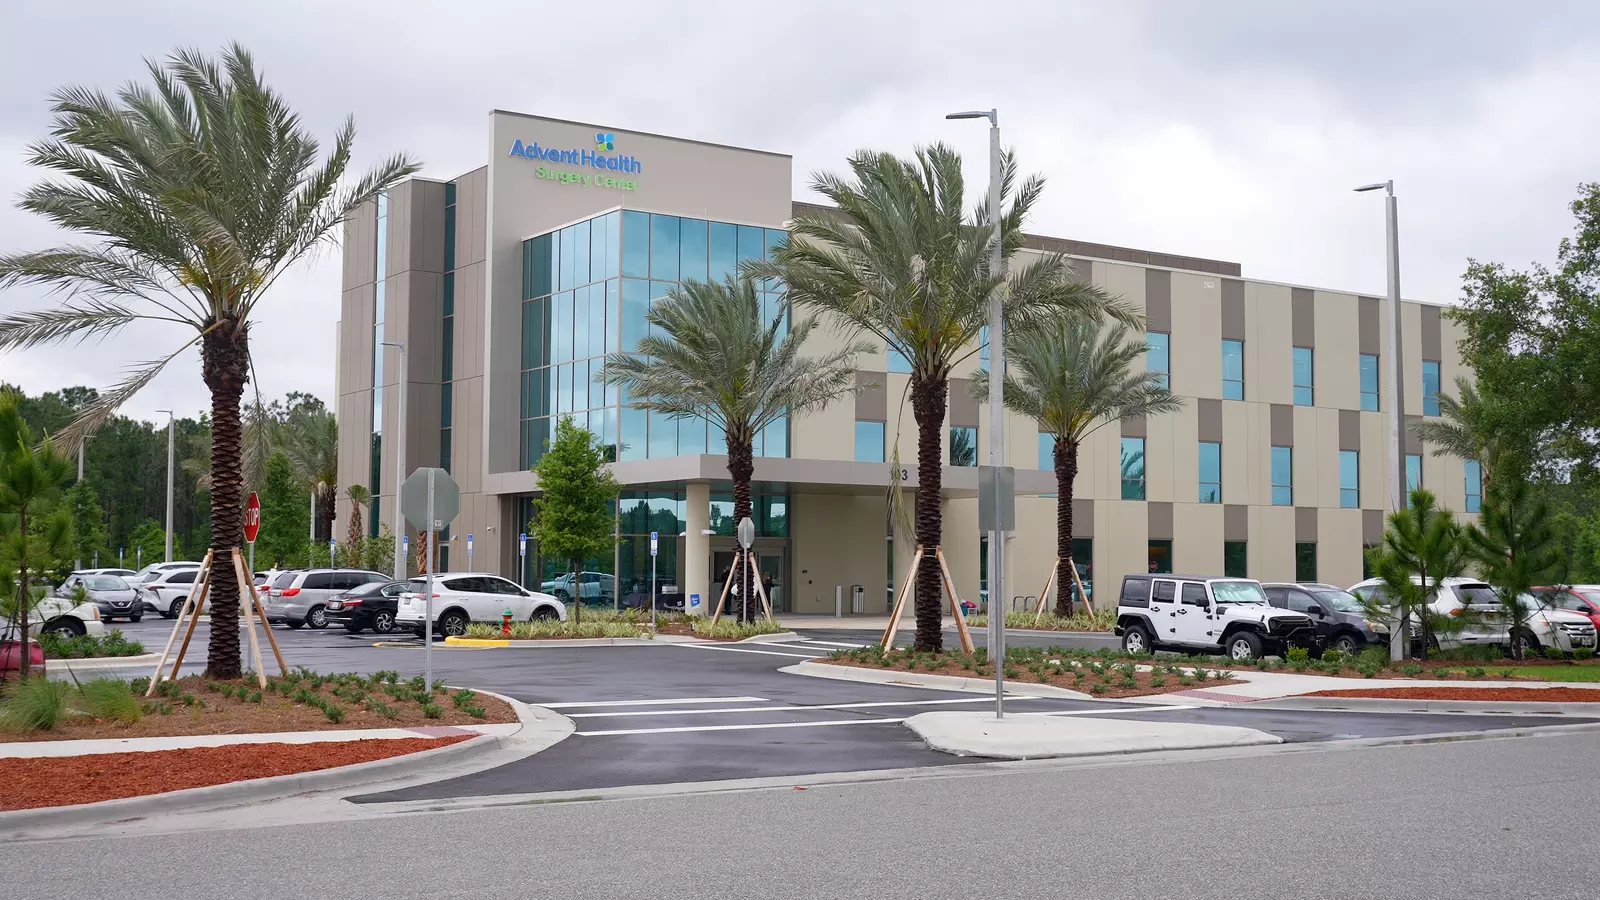 Brand-new surgery center and medical office building unveiled by AdventHealth Daytona Beach 